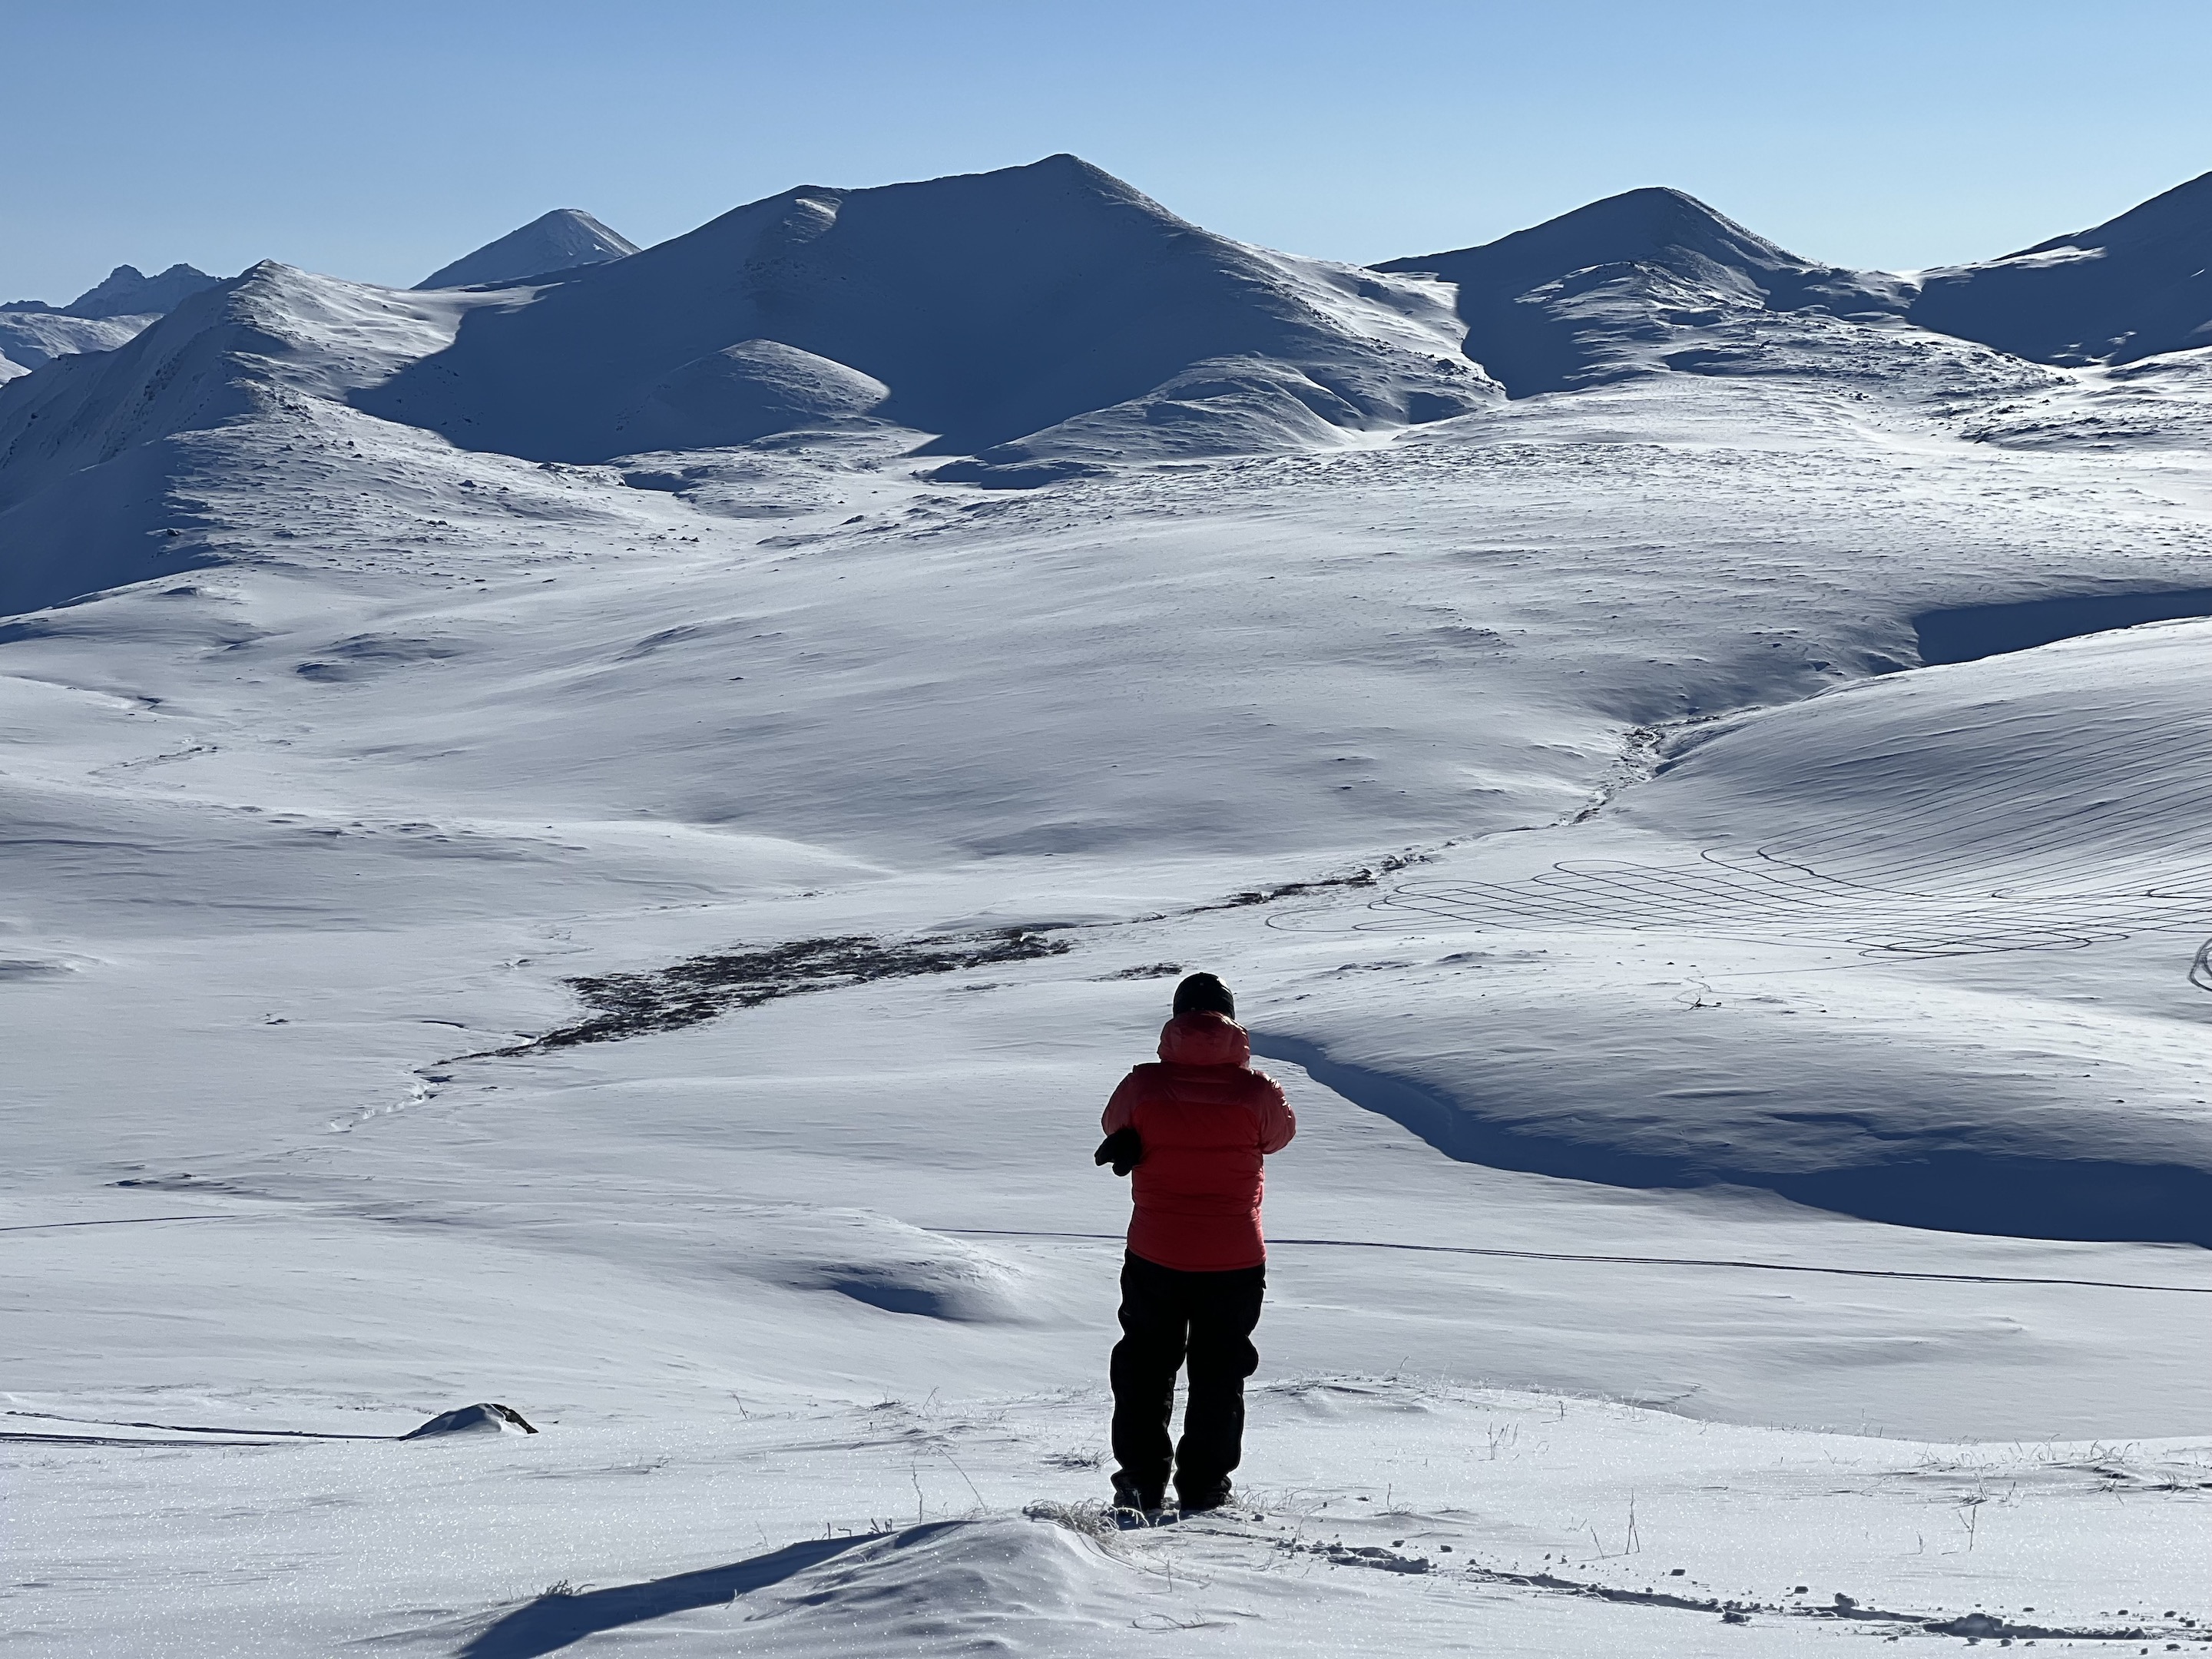 A person in a red down jacket and black snow pants stands facing away from the camera in the midst of a vast snowy landscape.